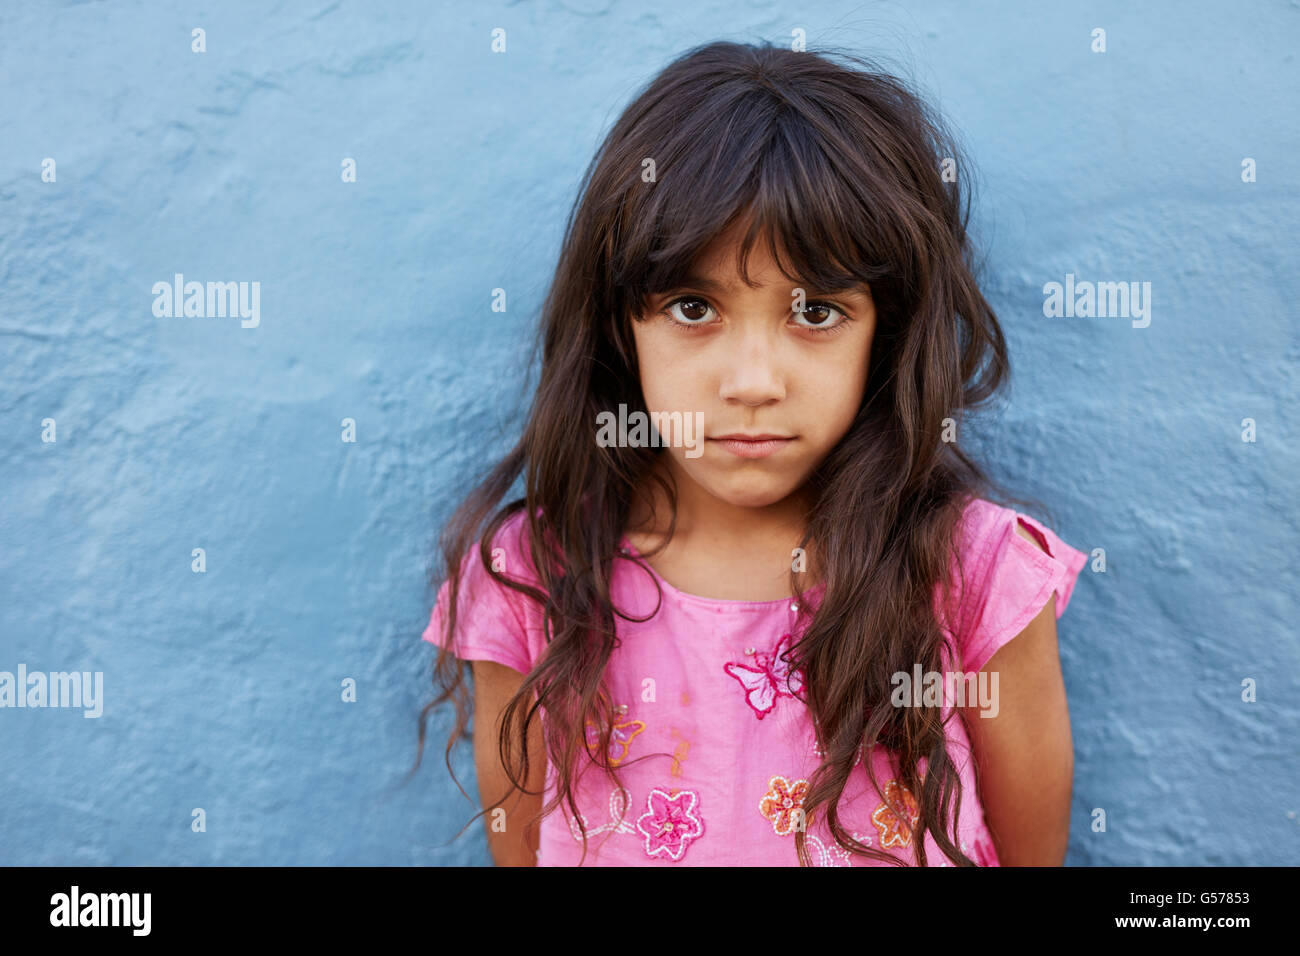 Close up portrait of innocent little girl standing against blue wall, she is looking at camera with serious expression on her fa Stock Photo